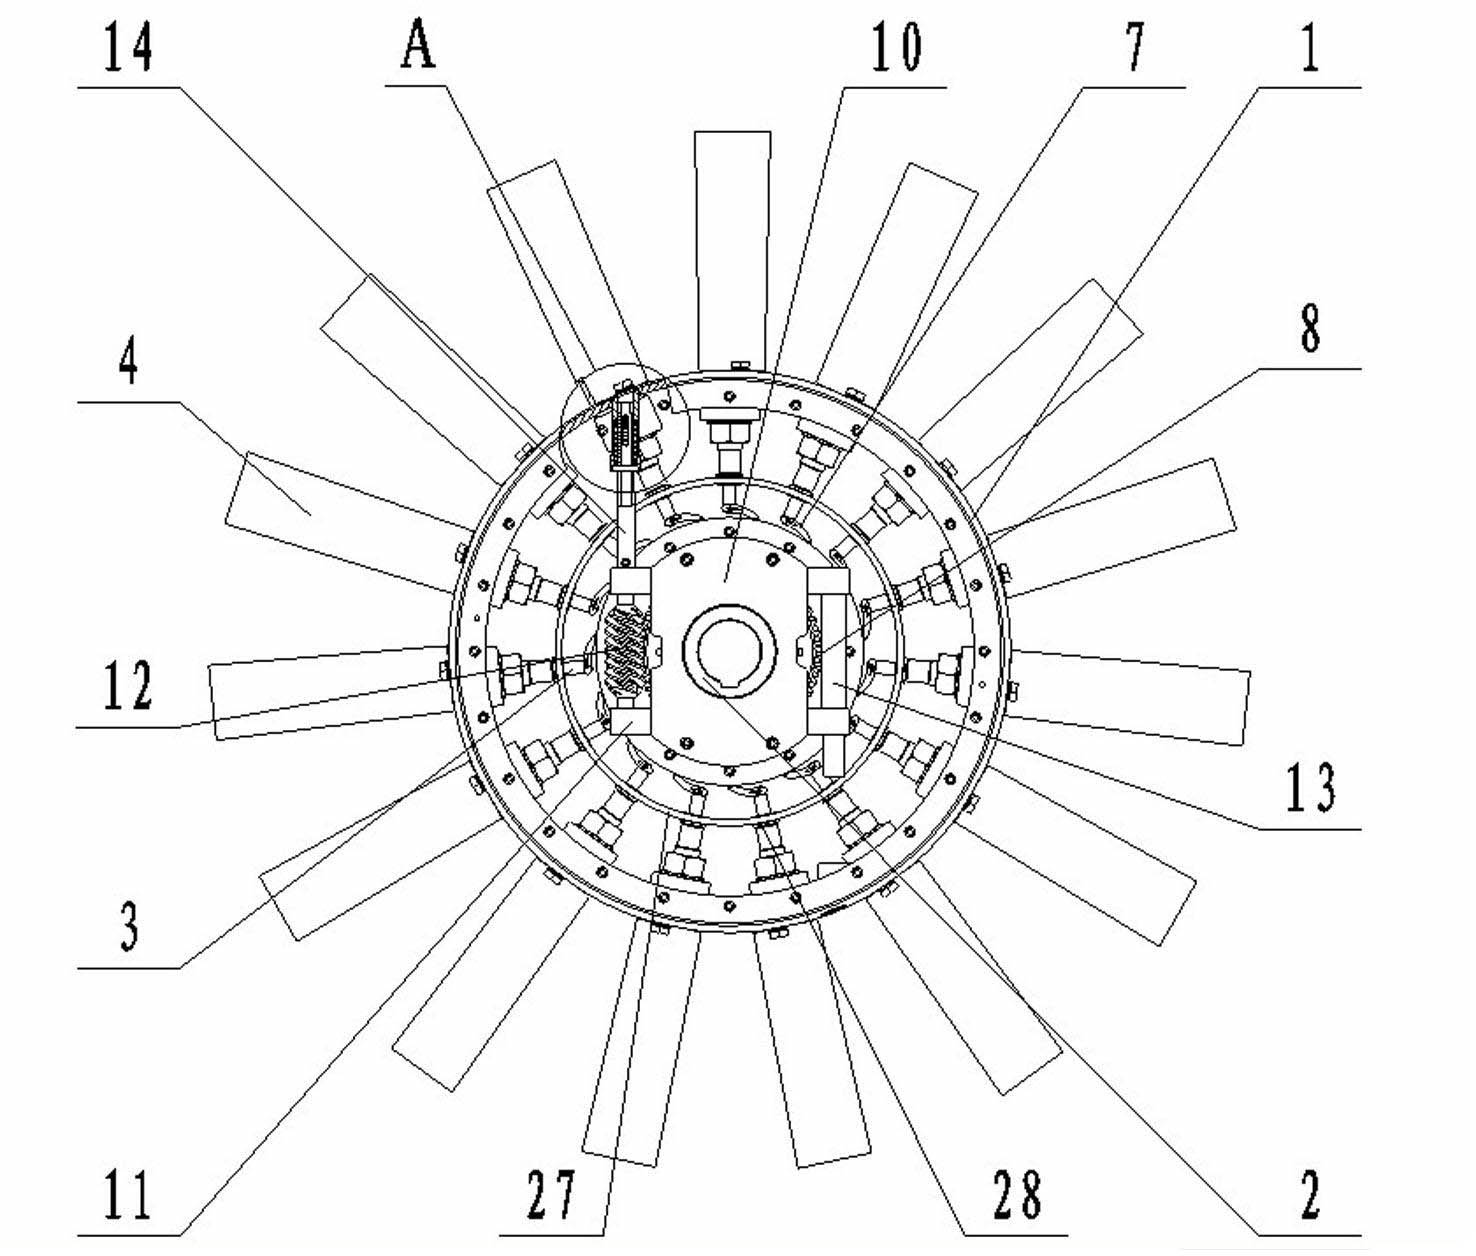 Axial flow ventilator capable of synchronously adjusting blades